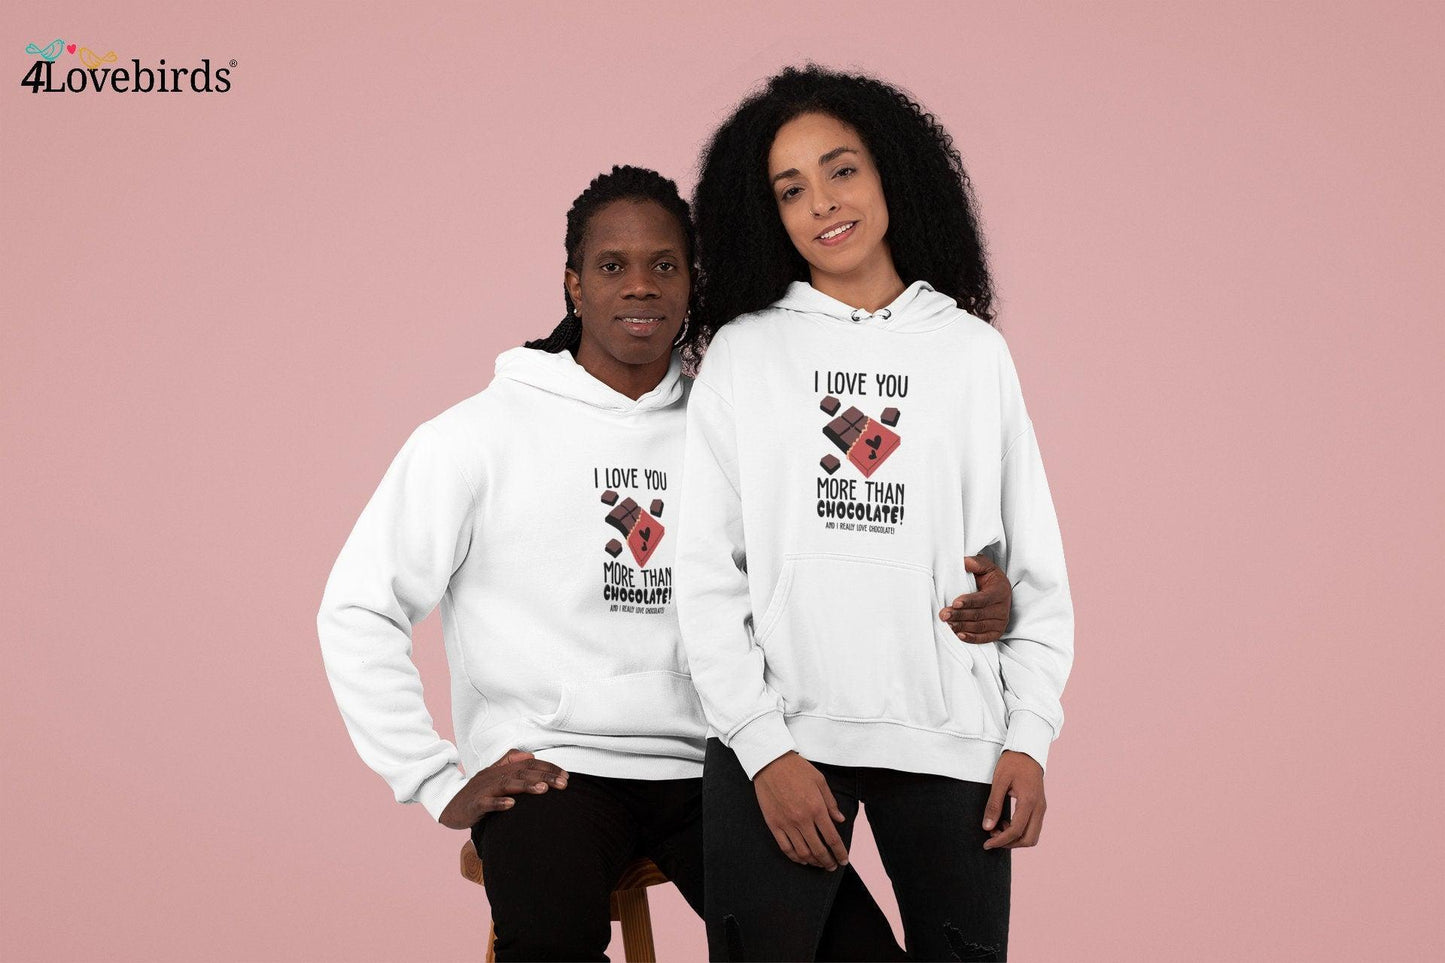 I love you more than chocolate and i really love chocolate Hoodie, Funny matching T-shirt, Gift for Foodie Couples, Valentine Sweatshirt - 4Lovebirds